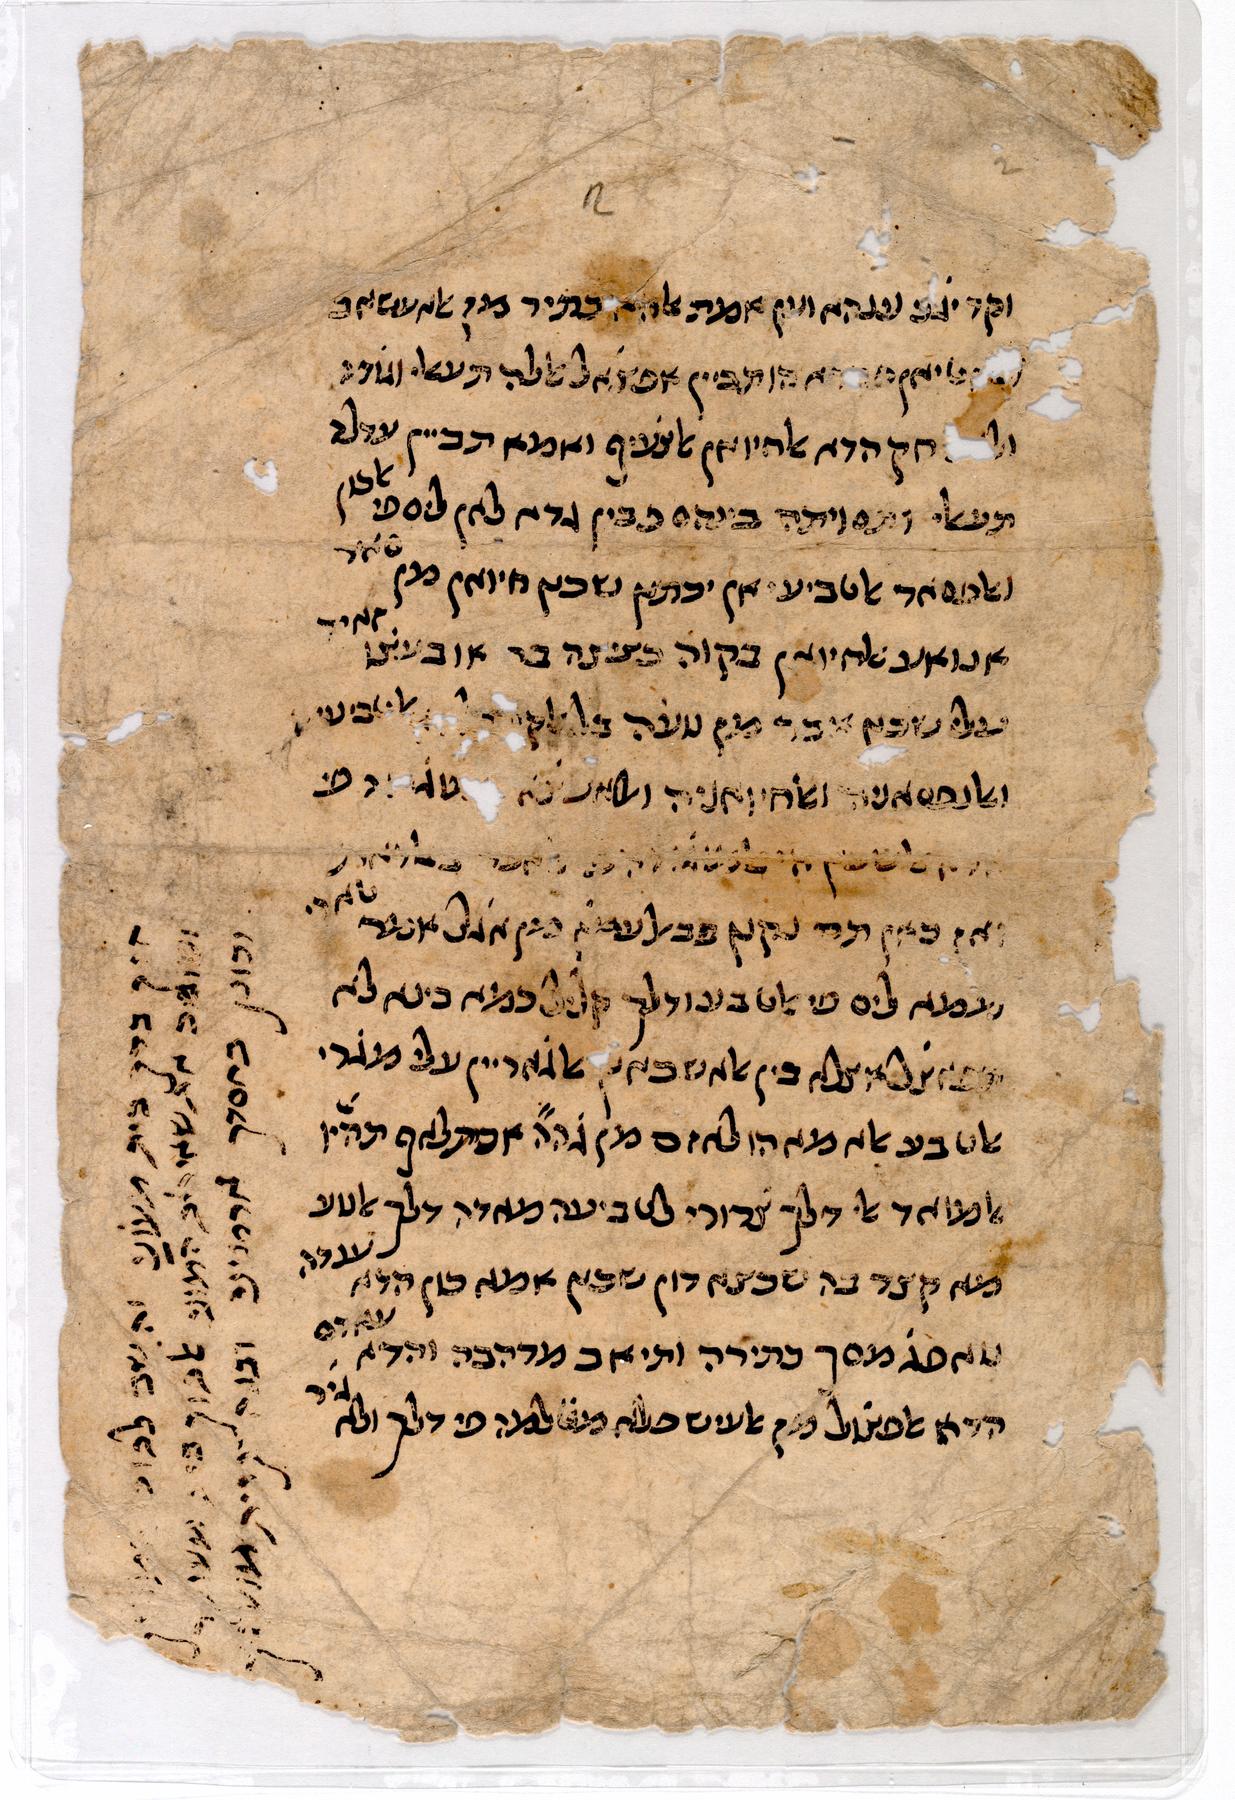 See this leaf in the context of Penn's Cairo Genizah Site